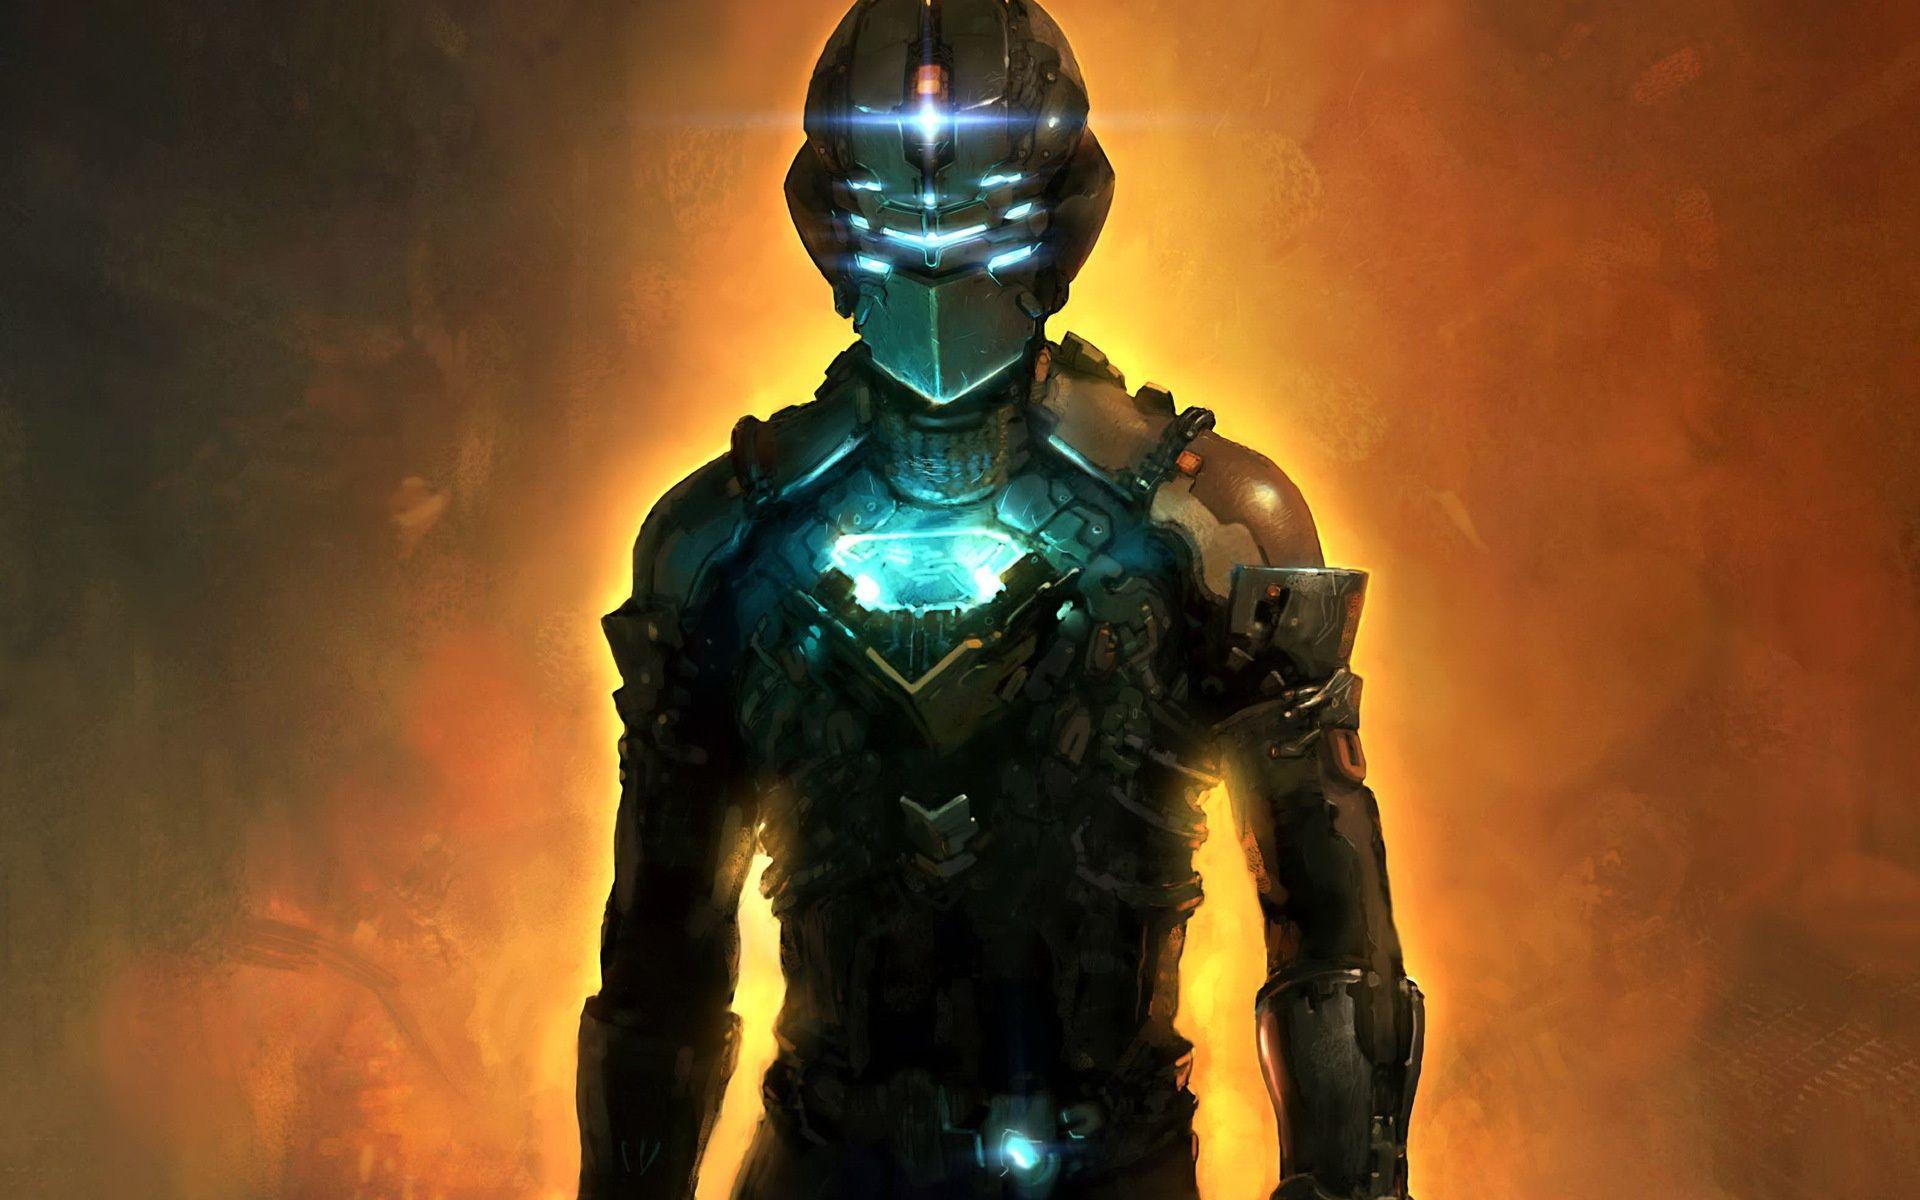 download free dead space 2 severed